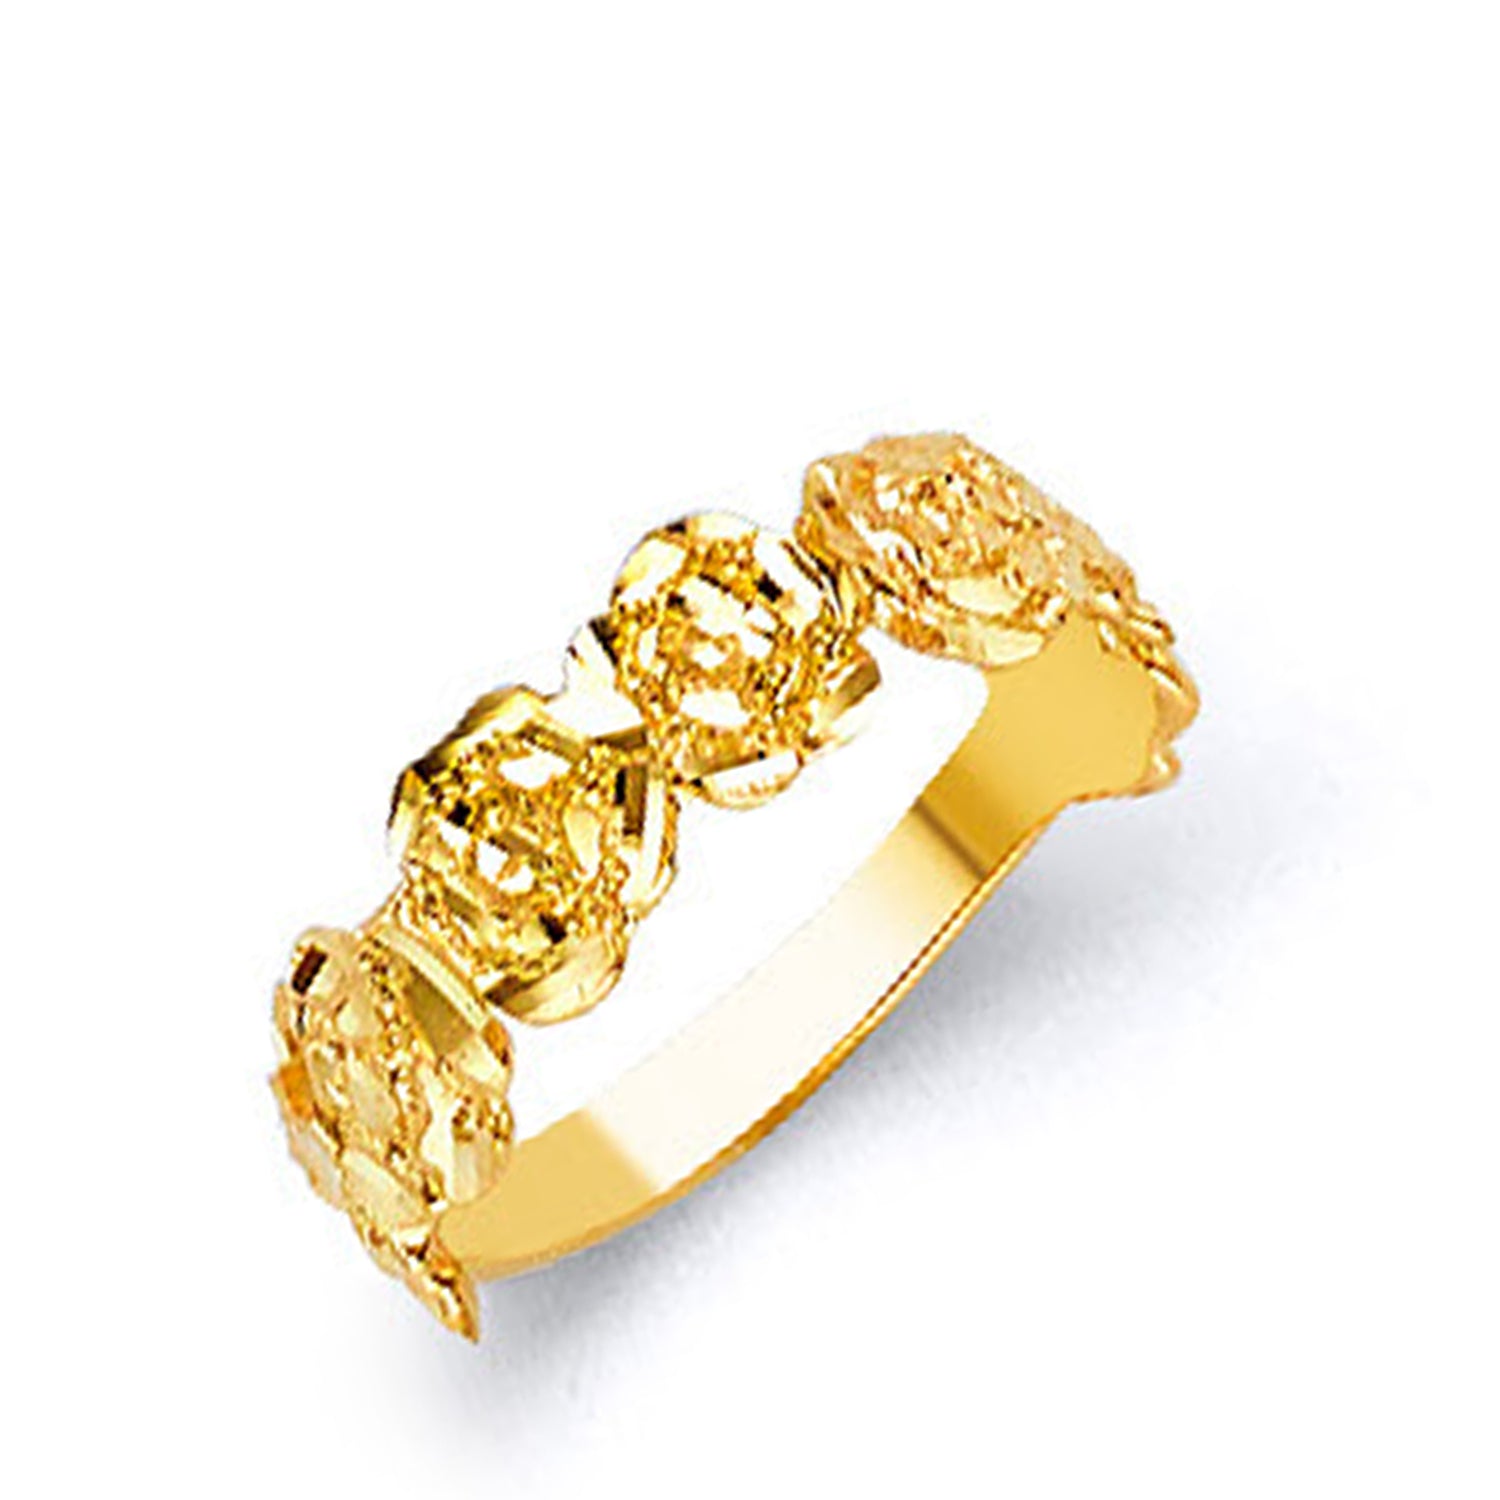 Aesthetic Textured Ring in Solid Gold 